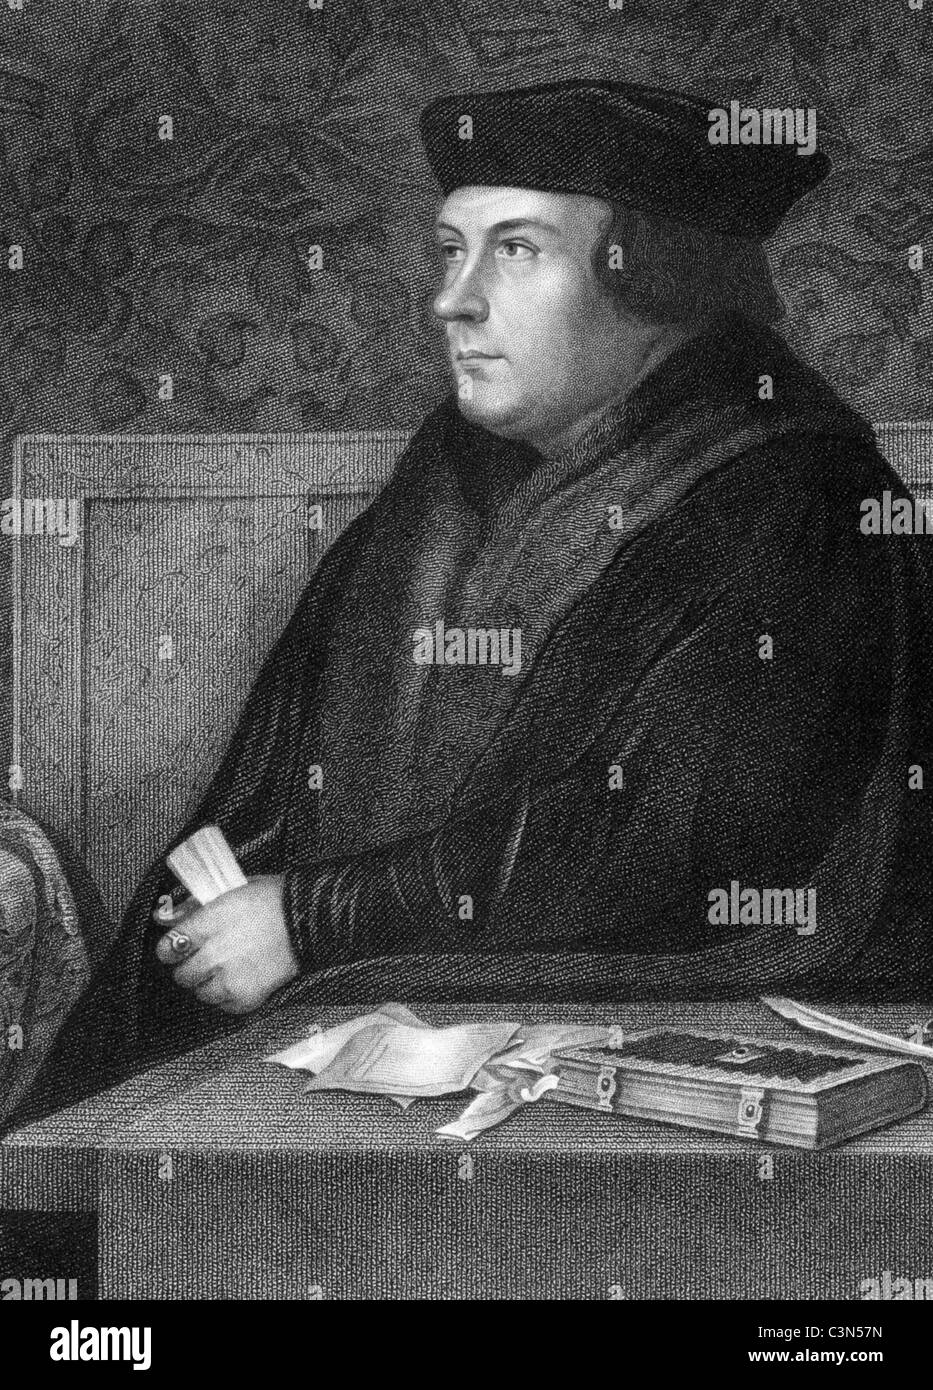 Thomas Cromwell, 1st Earl of Essex (1485-1540) on engraving from 1838. English statesman. Stock Photo